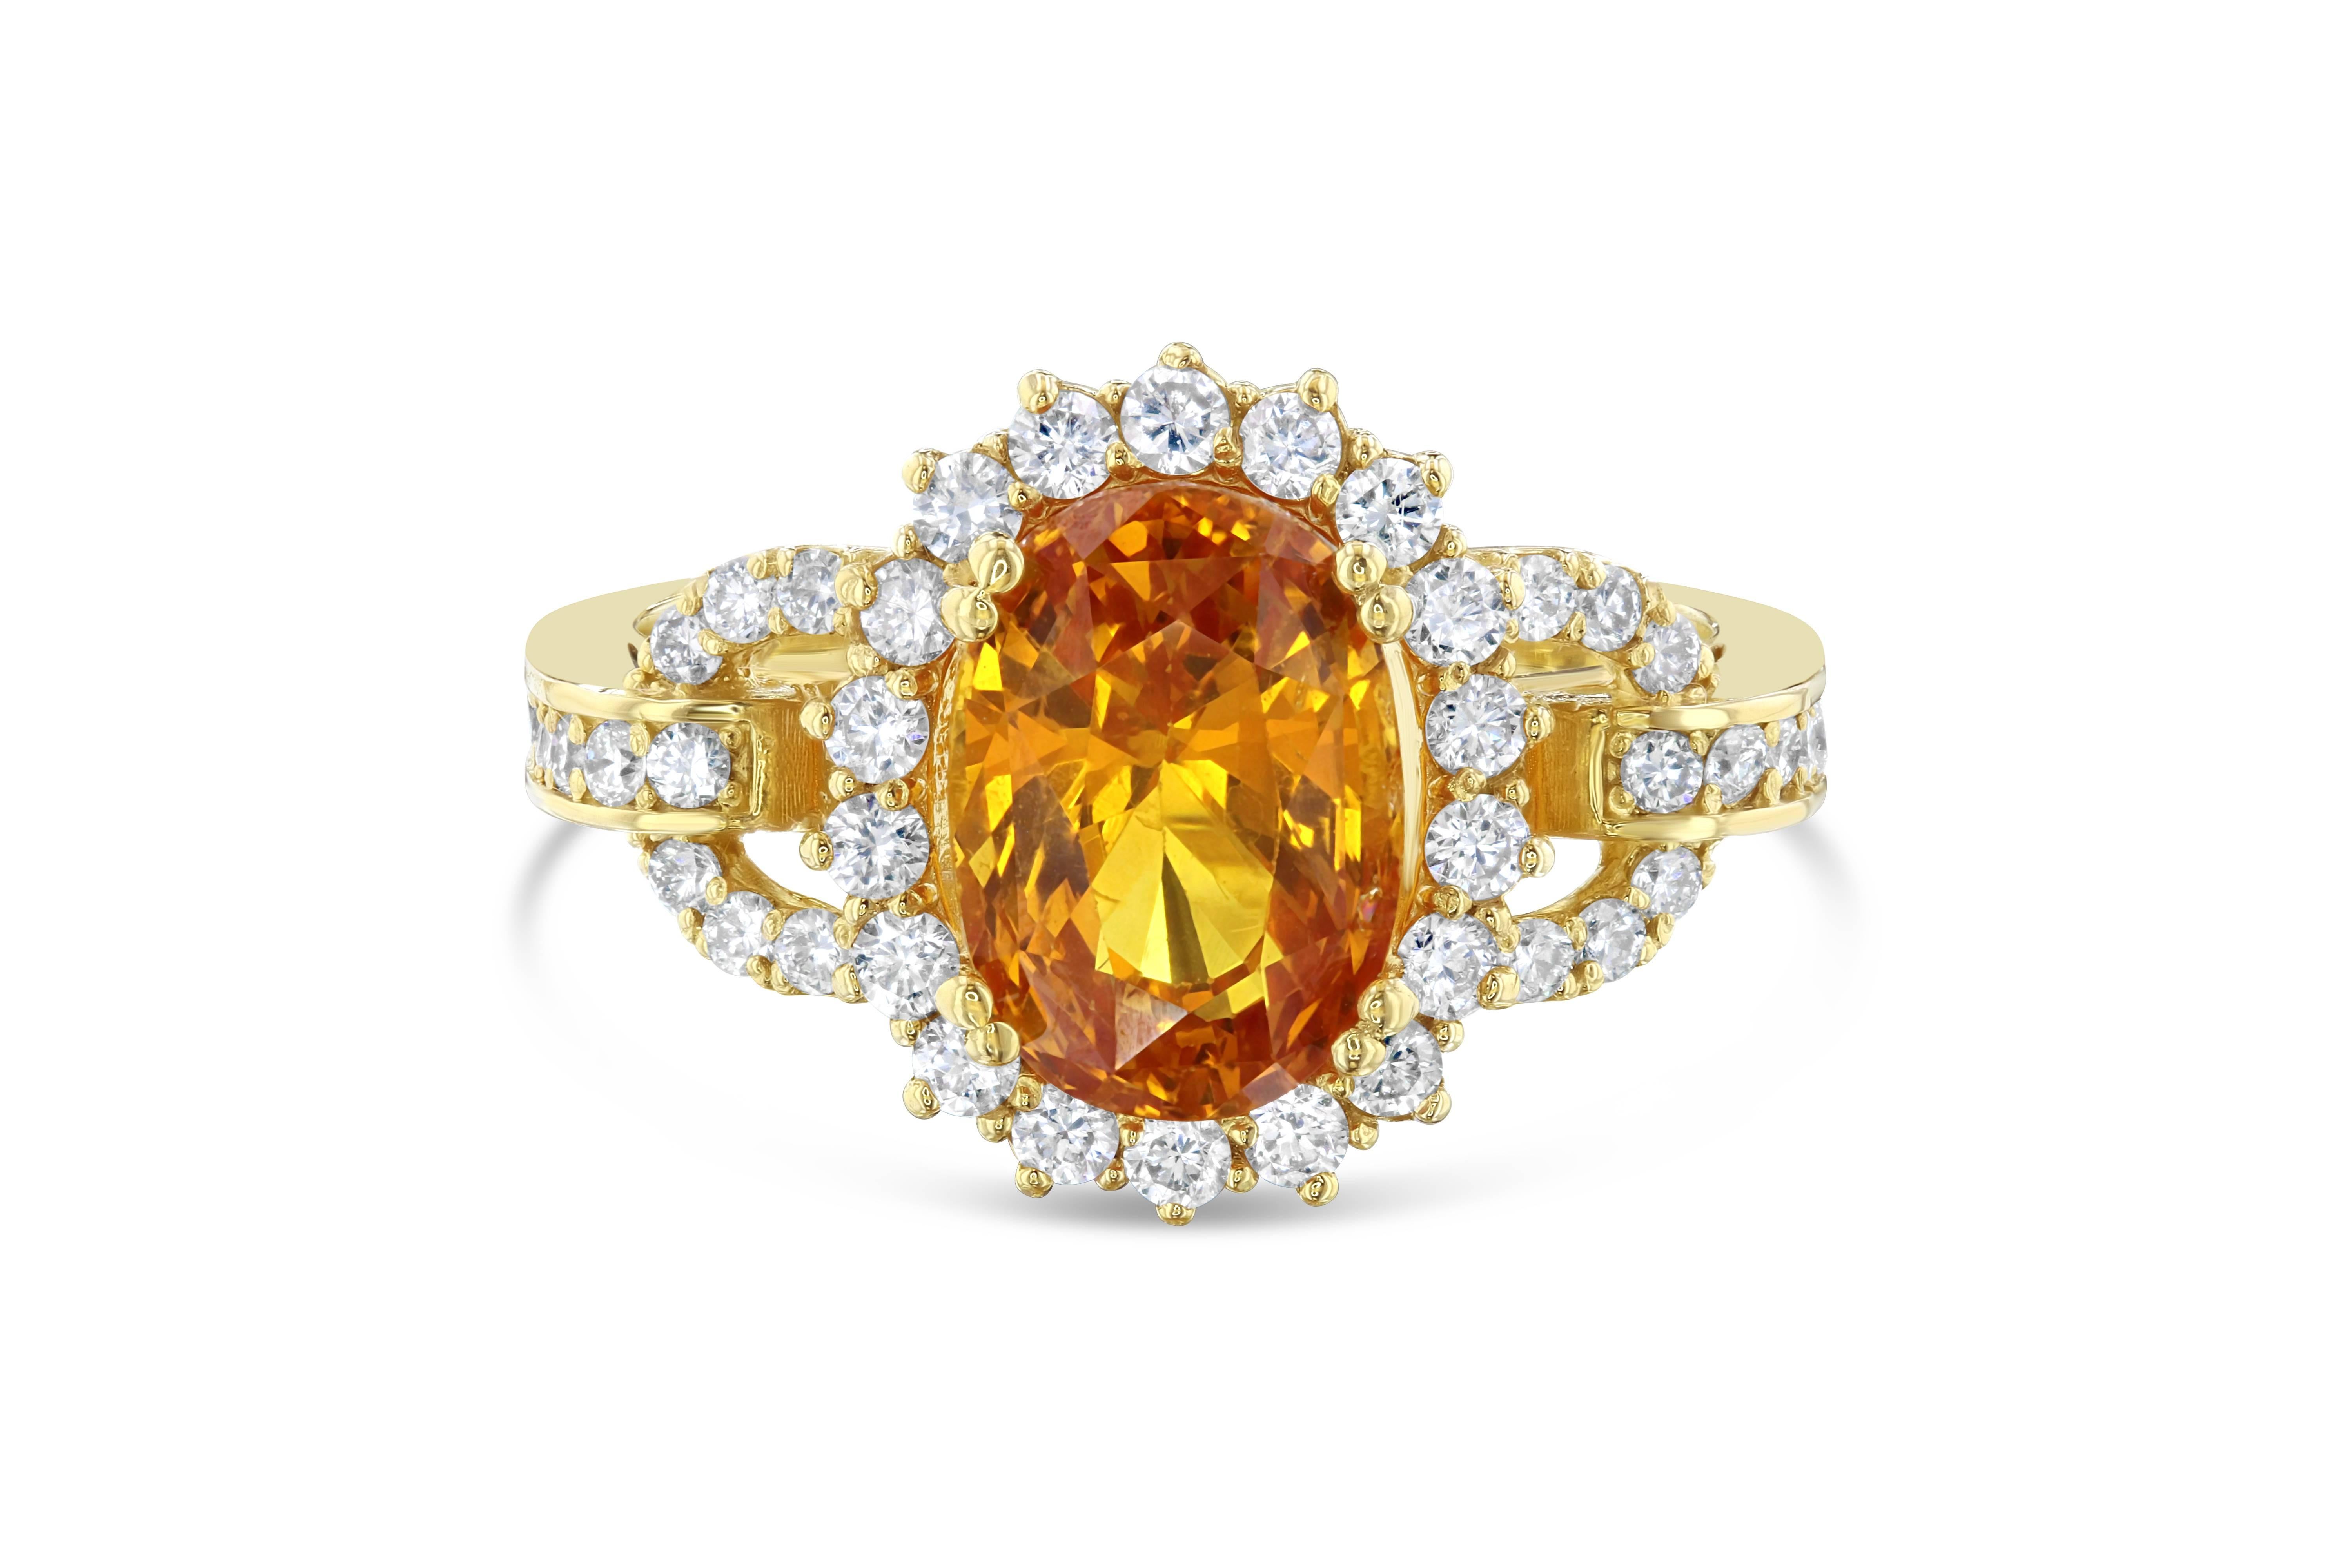 Gorgeous Orange Sapphire and Diamond Cocktail Ring that is GIA Certified.  The Certificate number is:1176095015.  There is a 4.47 carat Oval Cut Orange Sapphire in the center of the ring and it is surrounded by 46 Round Cut Diamonds that weigh 0.66